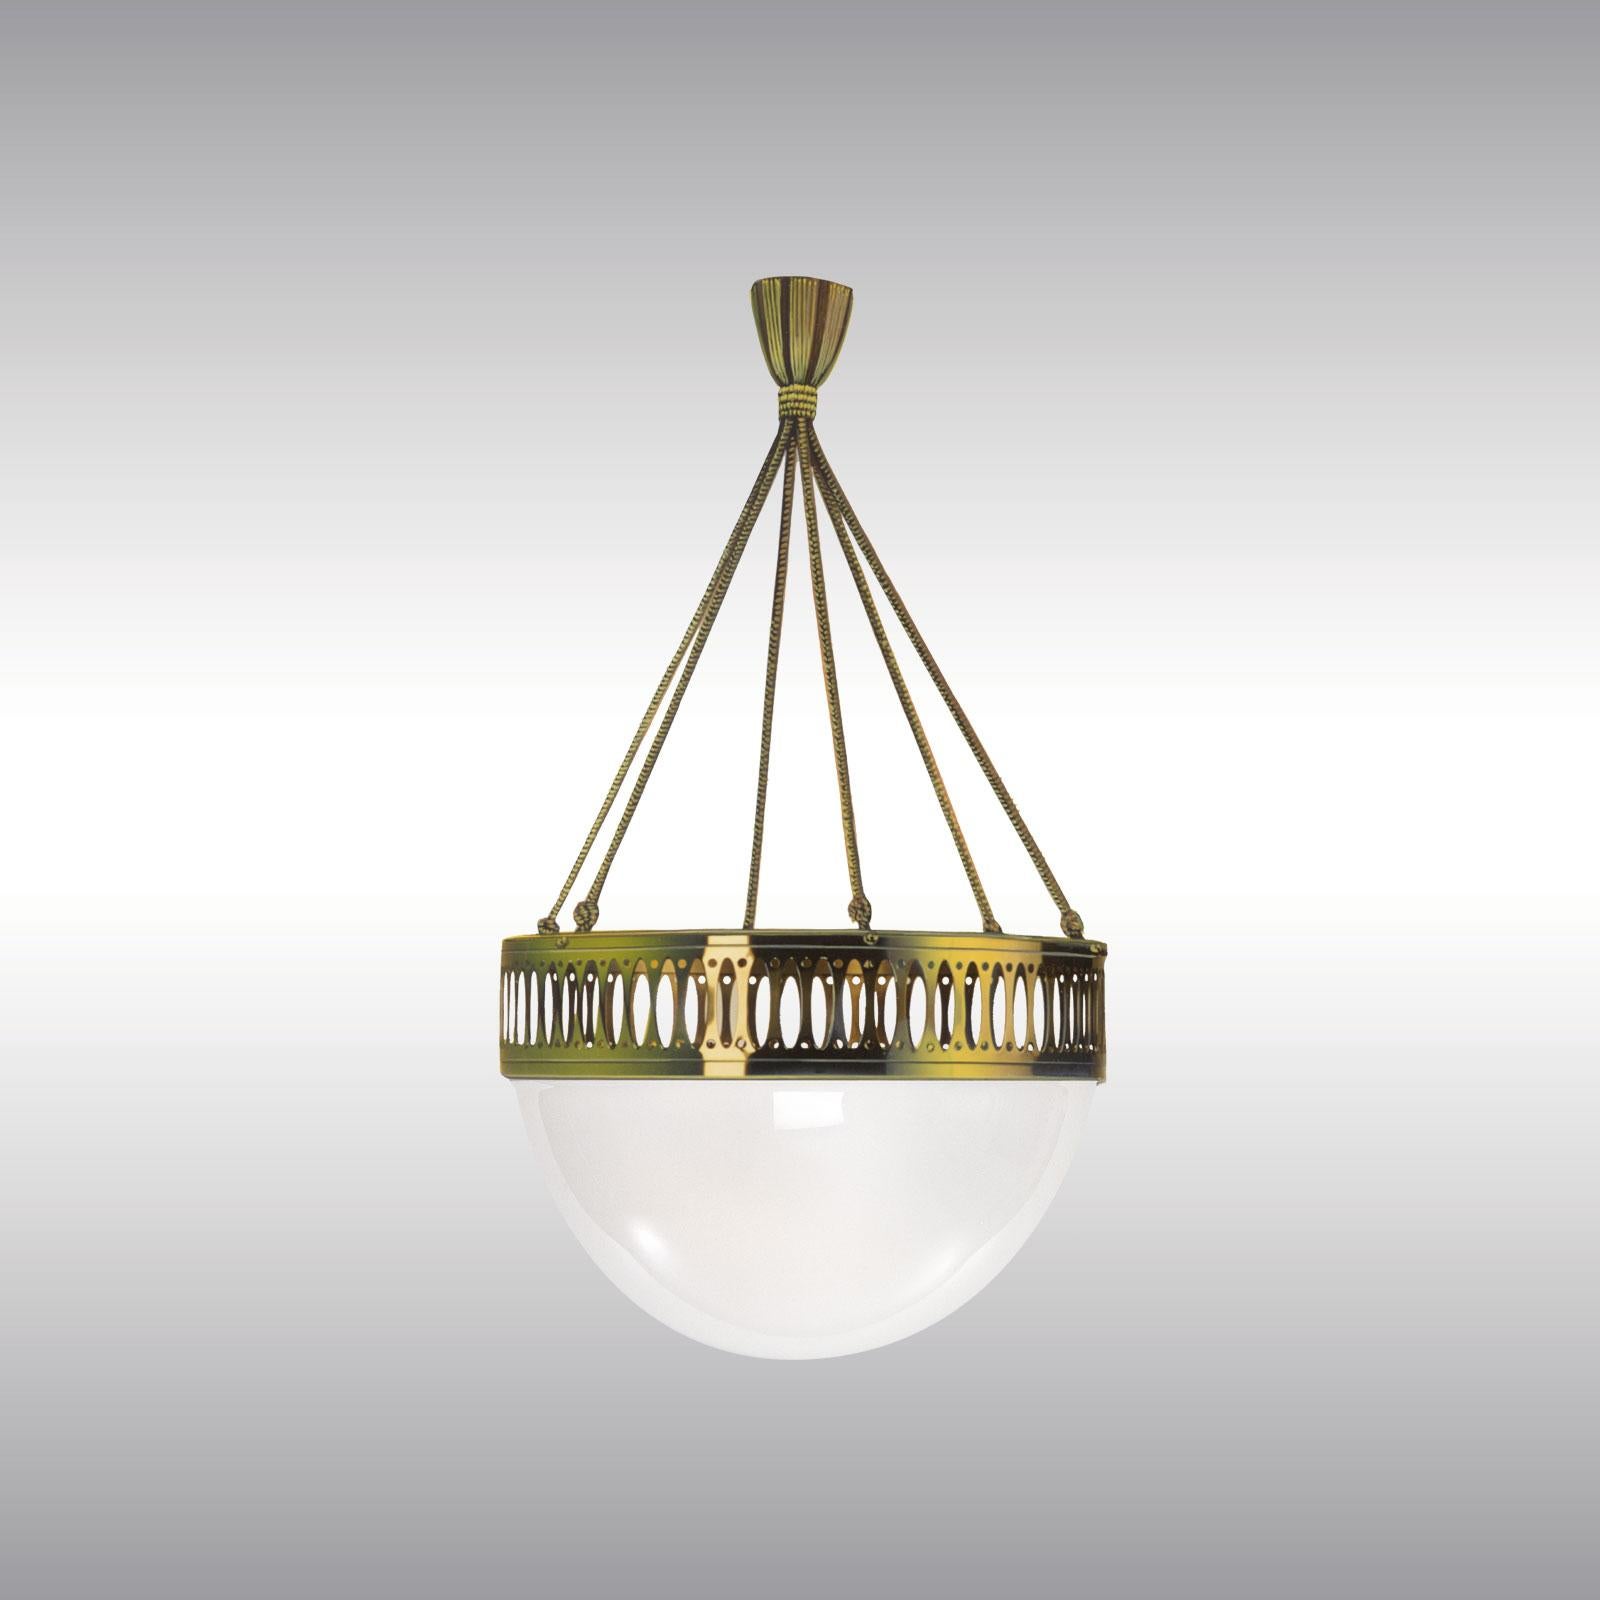 Punched brass-sheet, hand blown opaline glass 35cm or 50 cm in diameter, hanging on passement

Brass, optionally varnished or nickel-plated, all other finishes on request

All components according to the UL regulations, with an additional charge